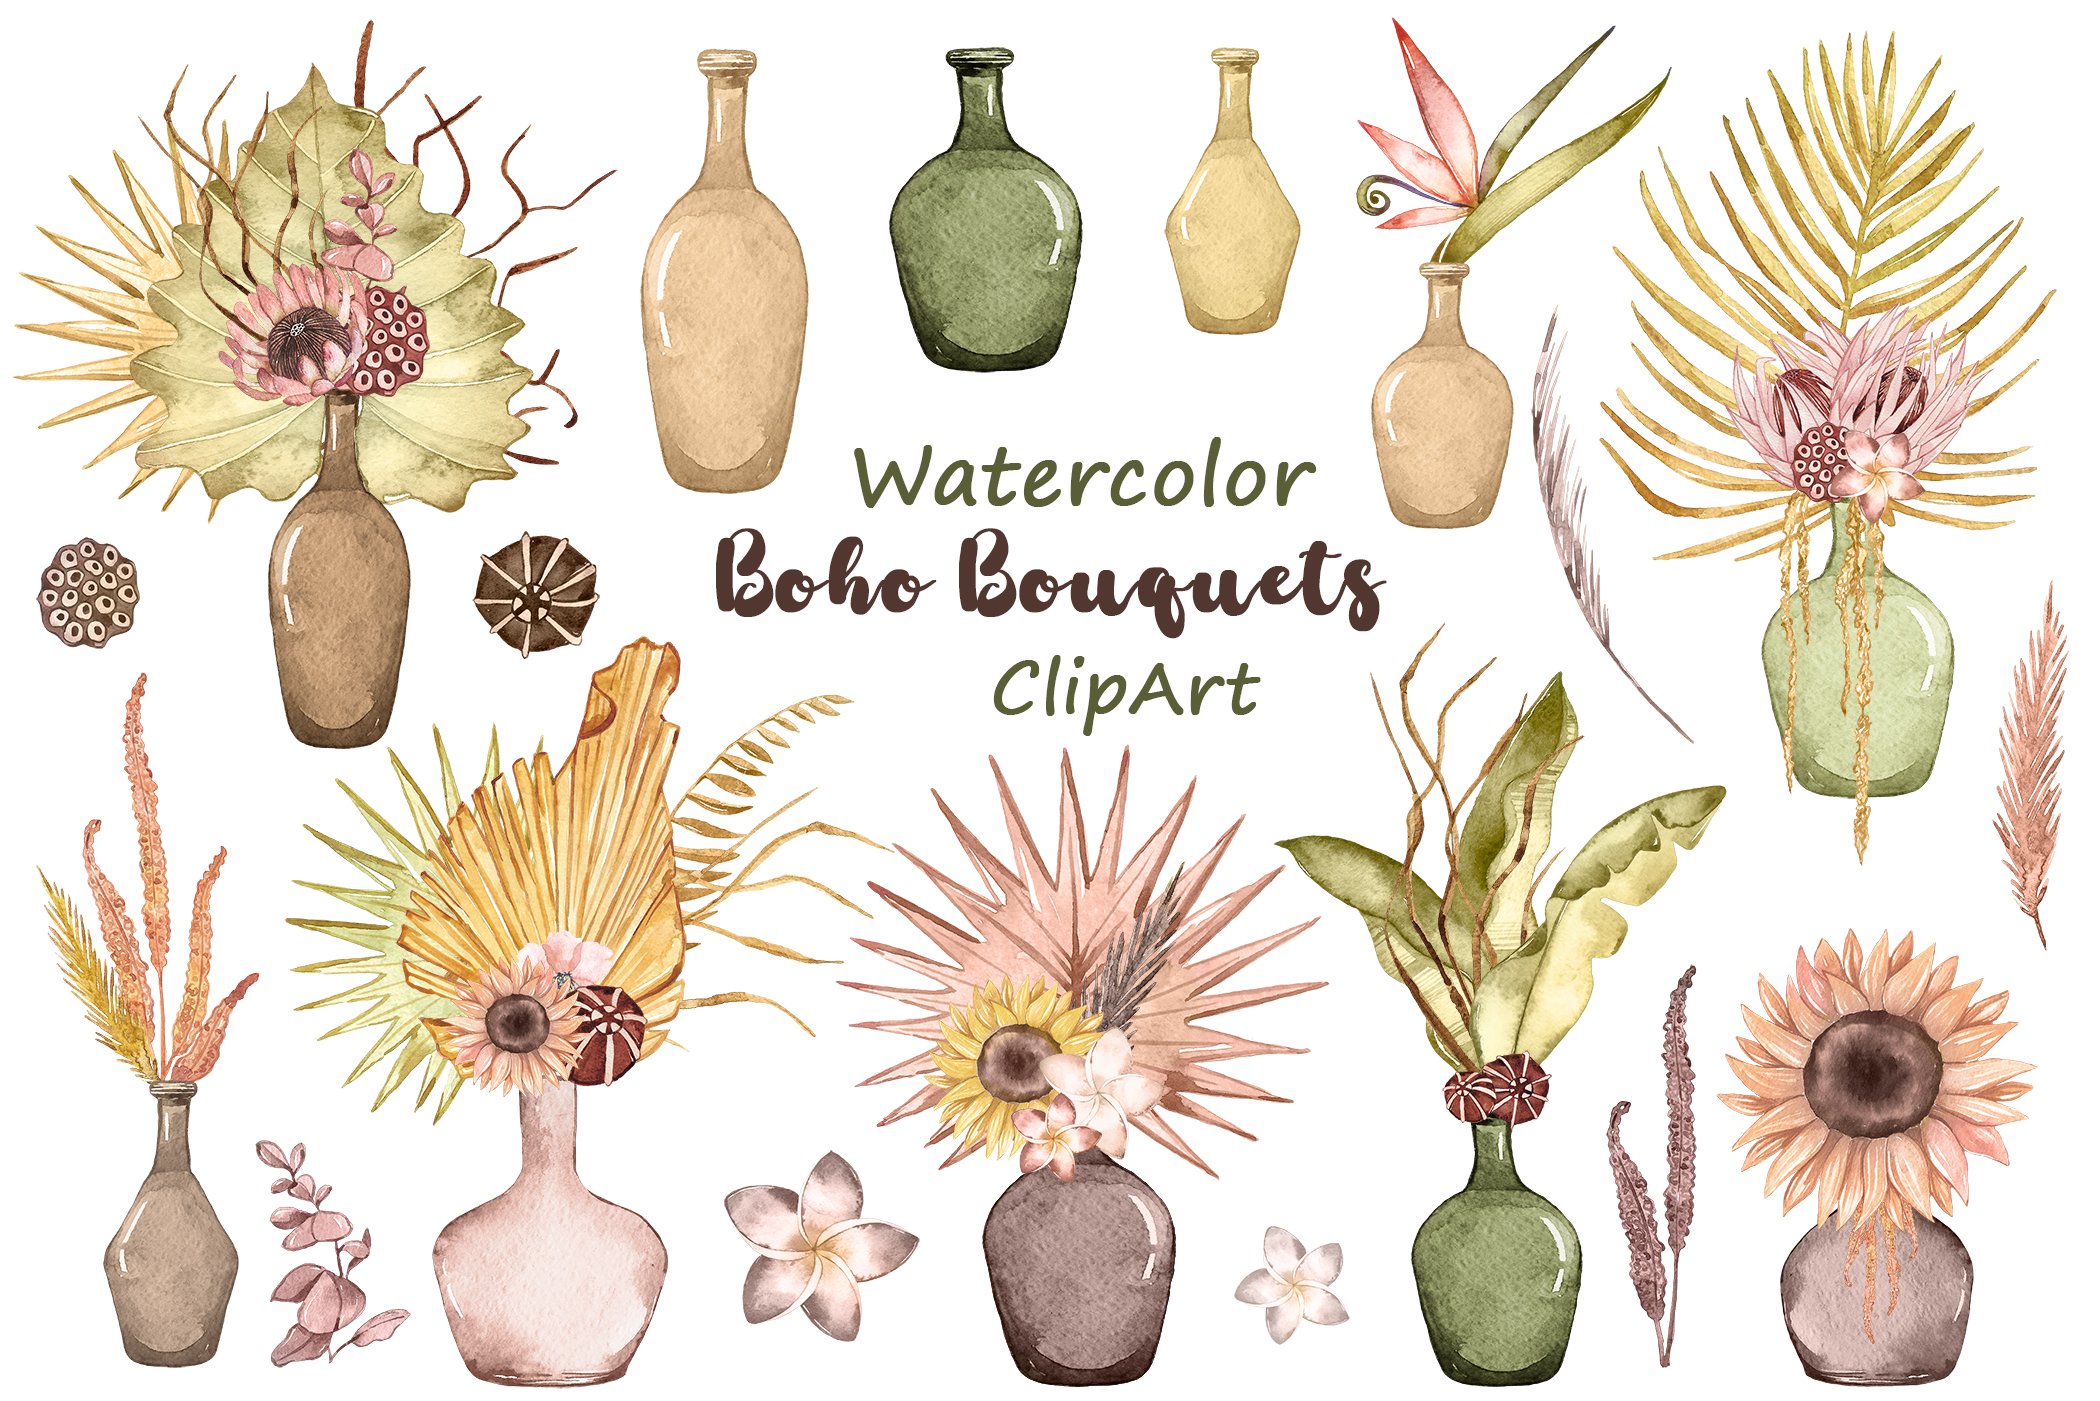 Watercolor Boho Bouquets in vase cover image.